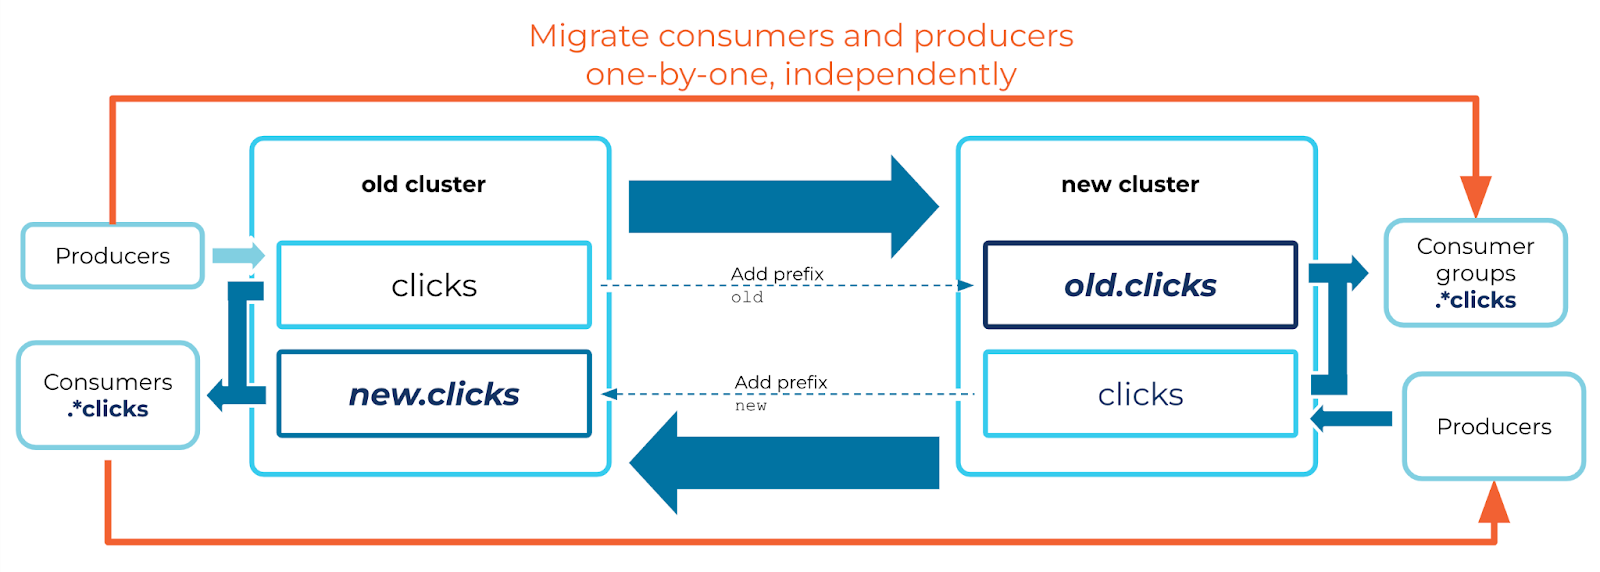 ../../_images/cluster-link-migrate-consumers-producers.png